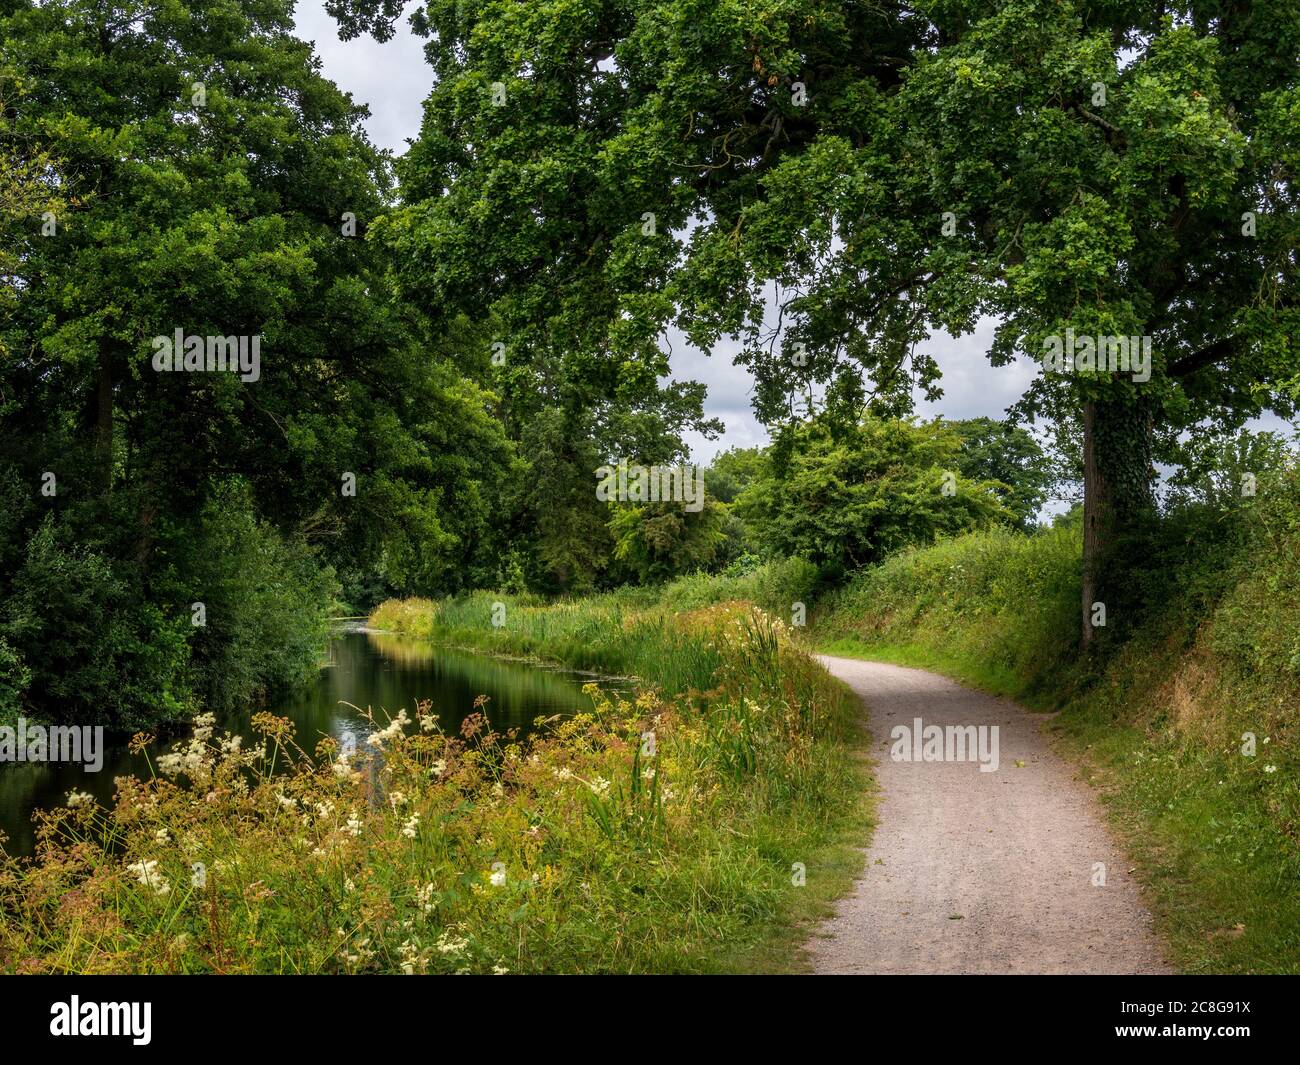 The towpath along the beautiful Grand Western Canal, Tiverton, Devon, UK. Stock Photo